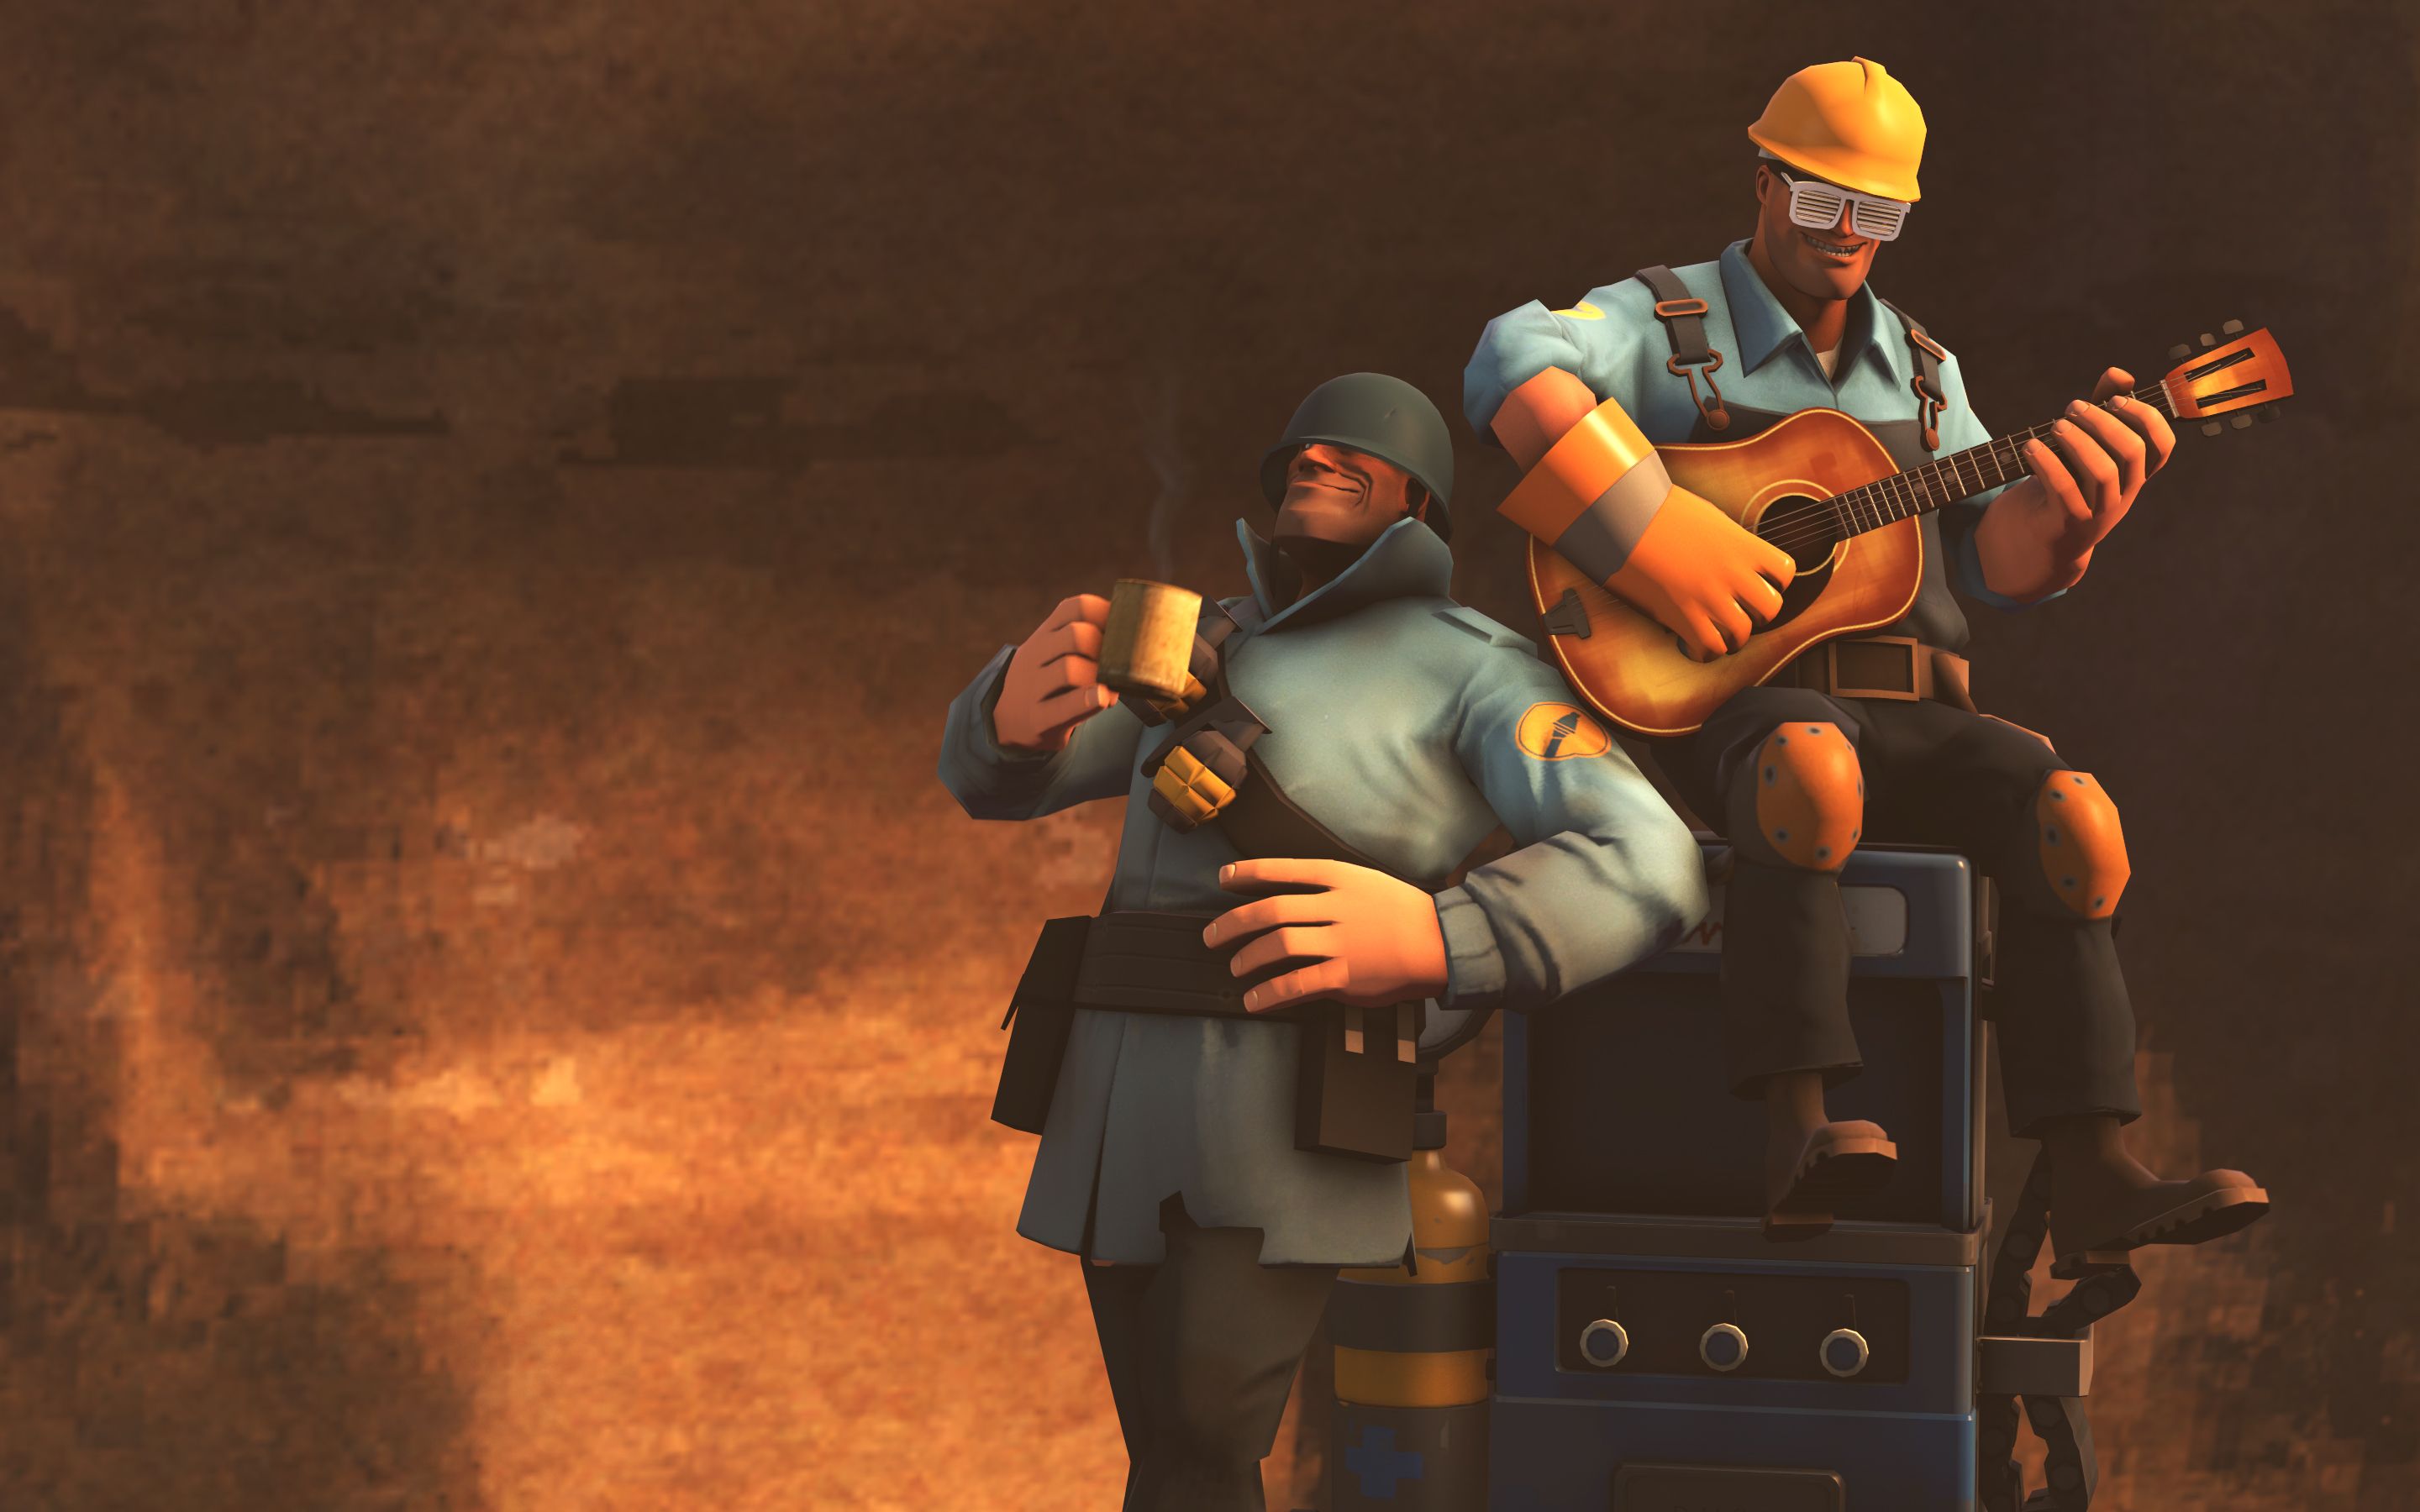 Team Fortress 2 Wallpaper Soldier and Engie Chill by DUNKMOVIES